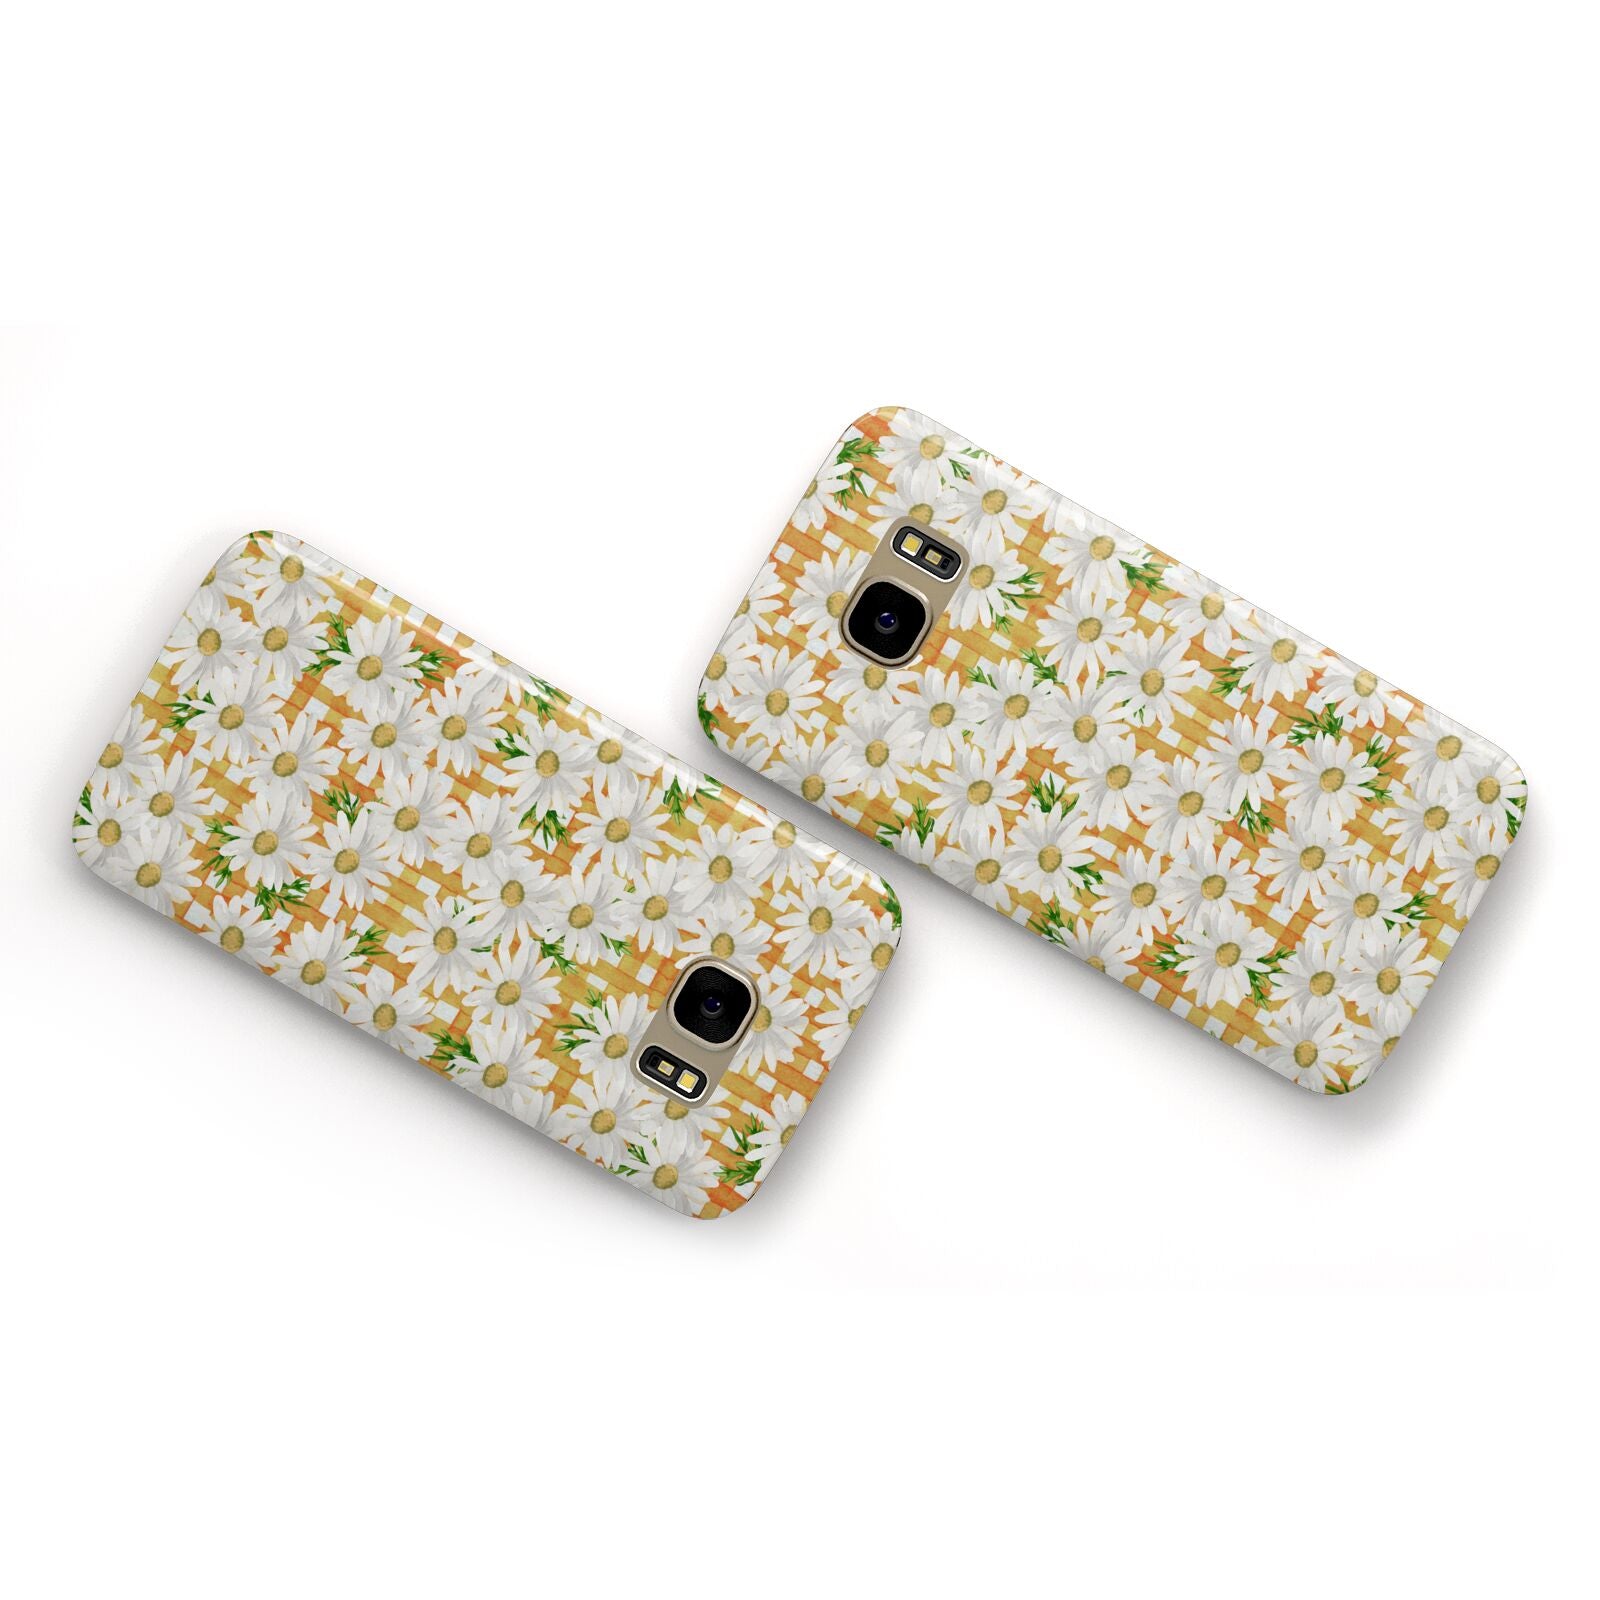 Checkered Daisy Samsung Galaxy Case Flat Overview